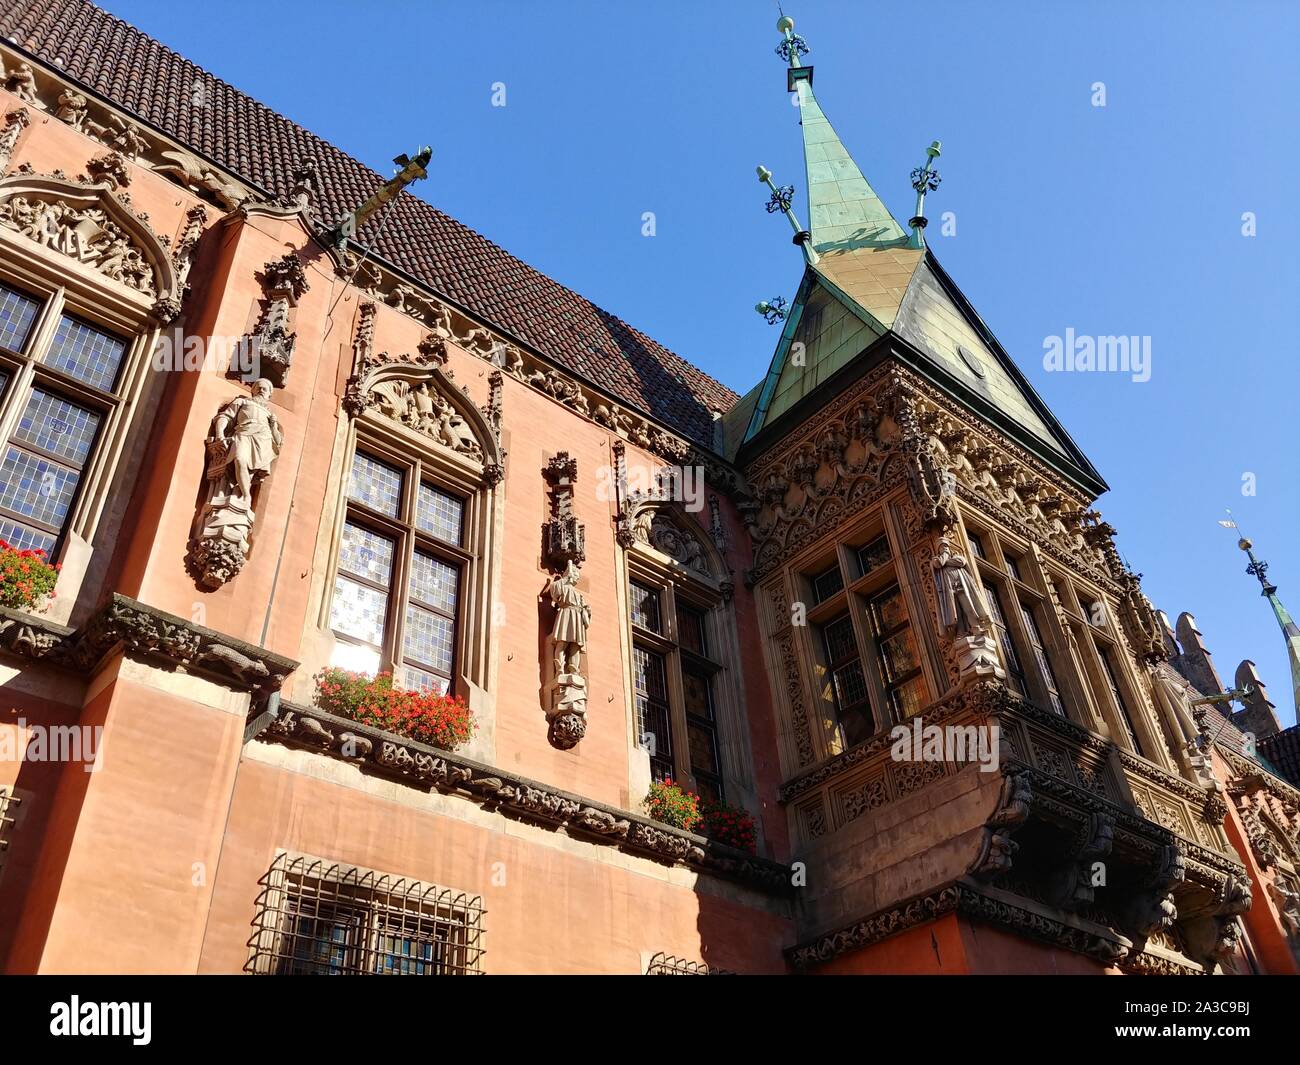 The view of the old town in Poland Stock Photo